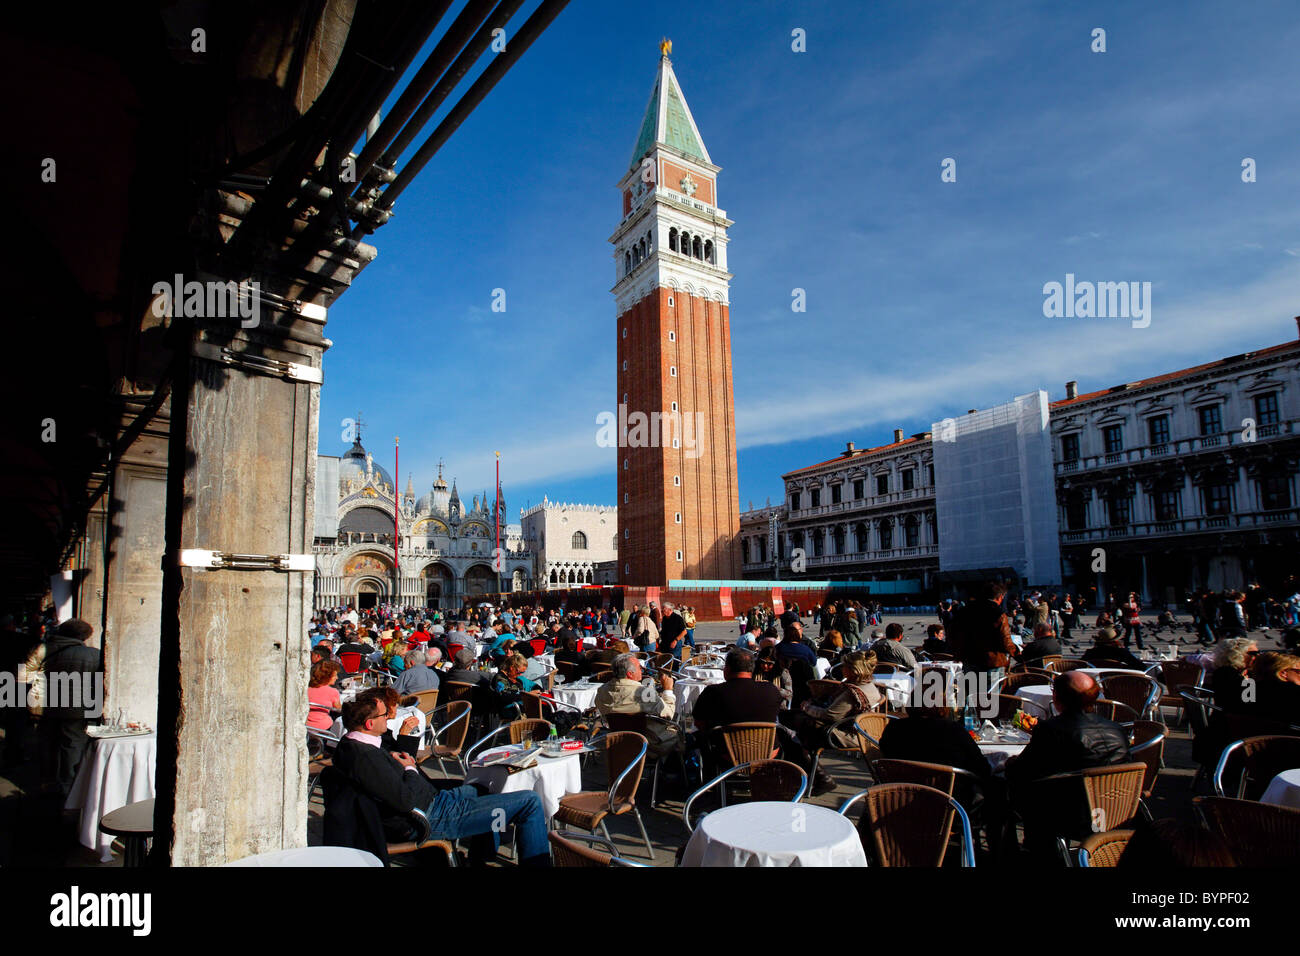 People Relaxing on St Mark's Square, Venice, Italy Stock Photo